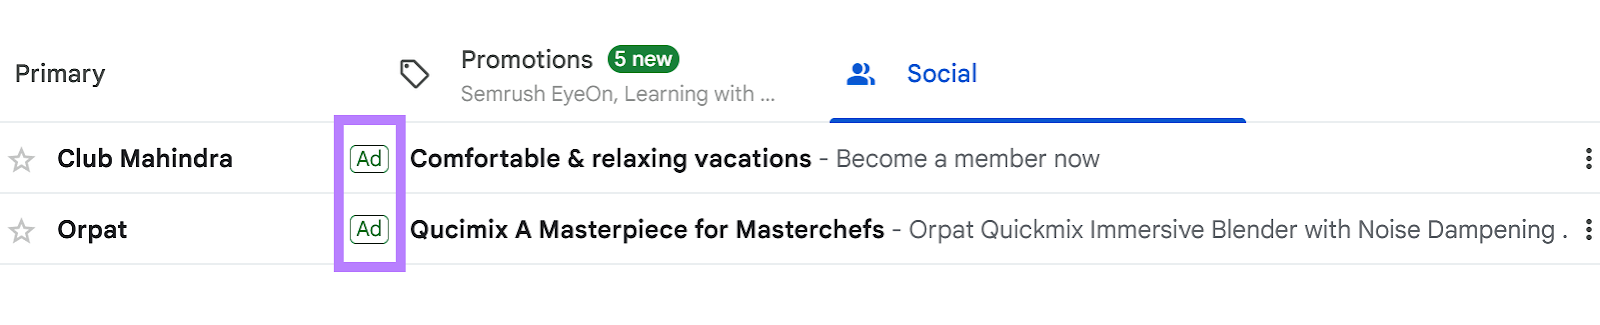 Gmail ads shown in the inbox with